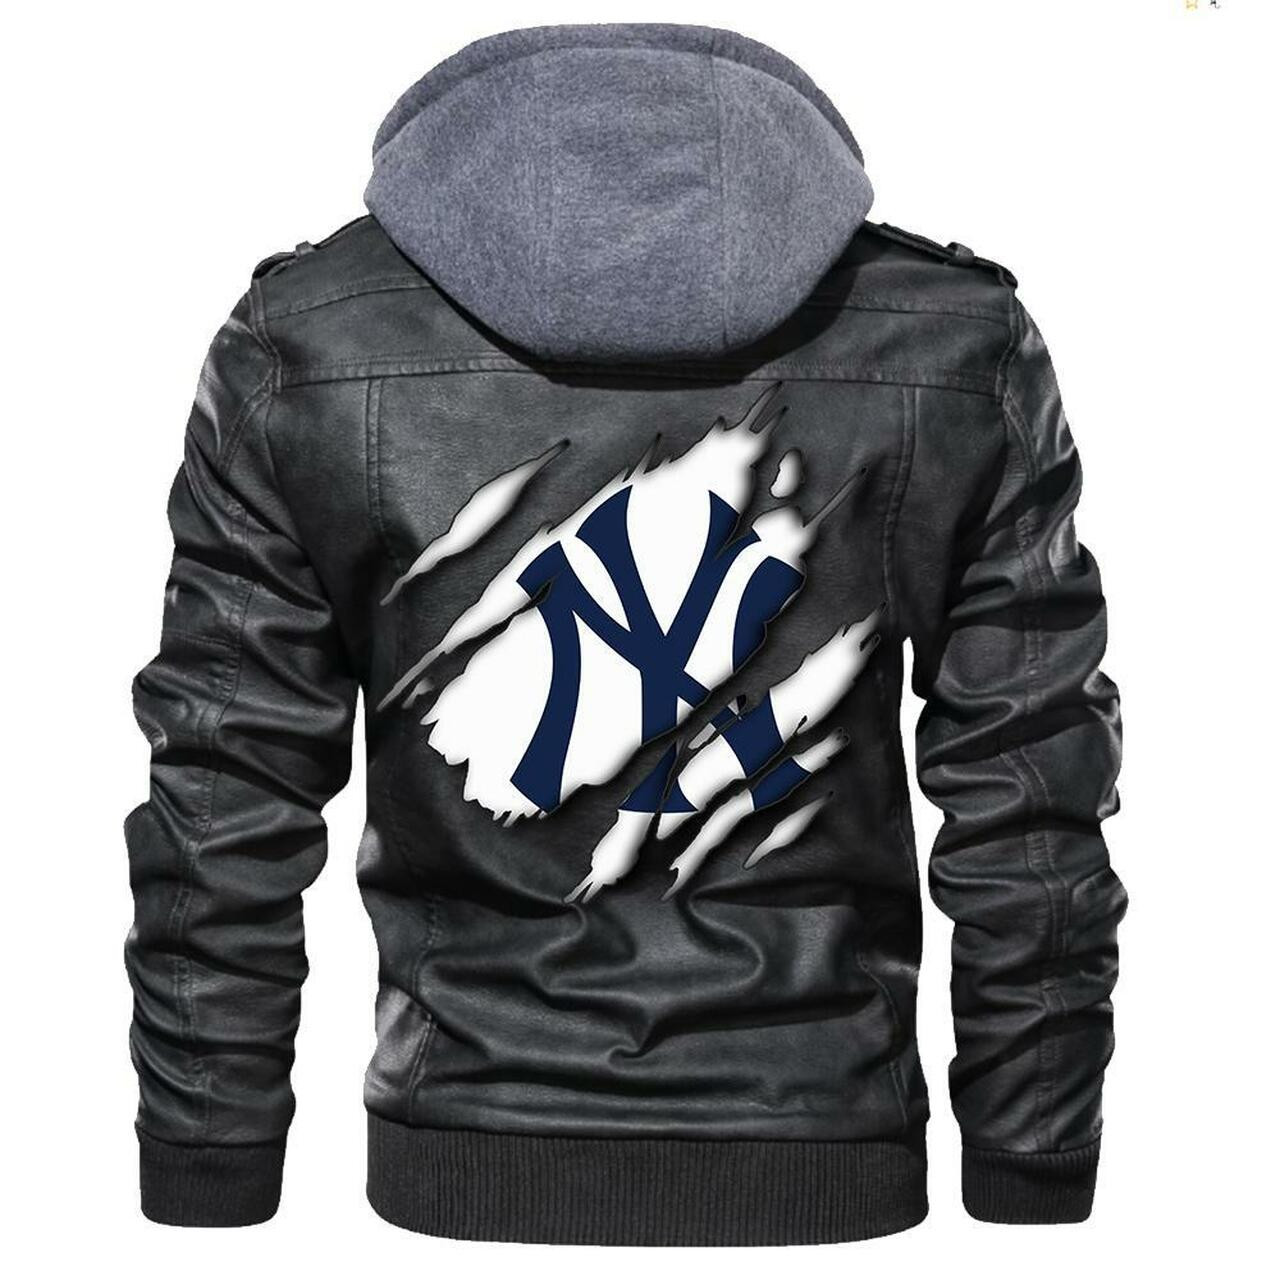 Check out and find the right leather jacket below 191